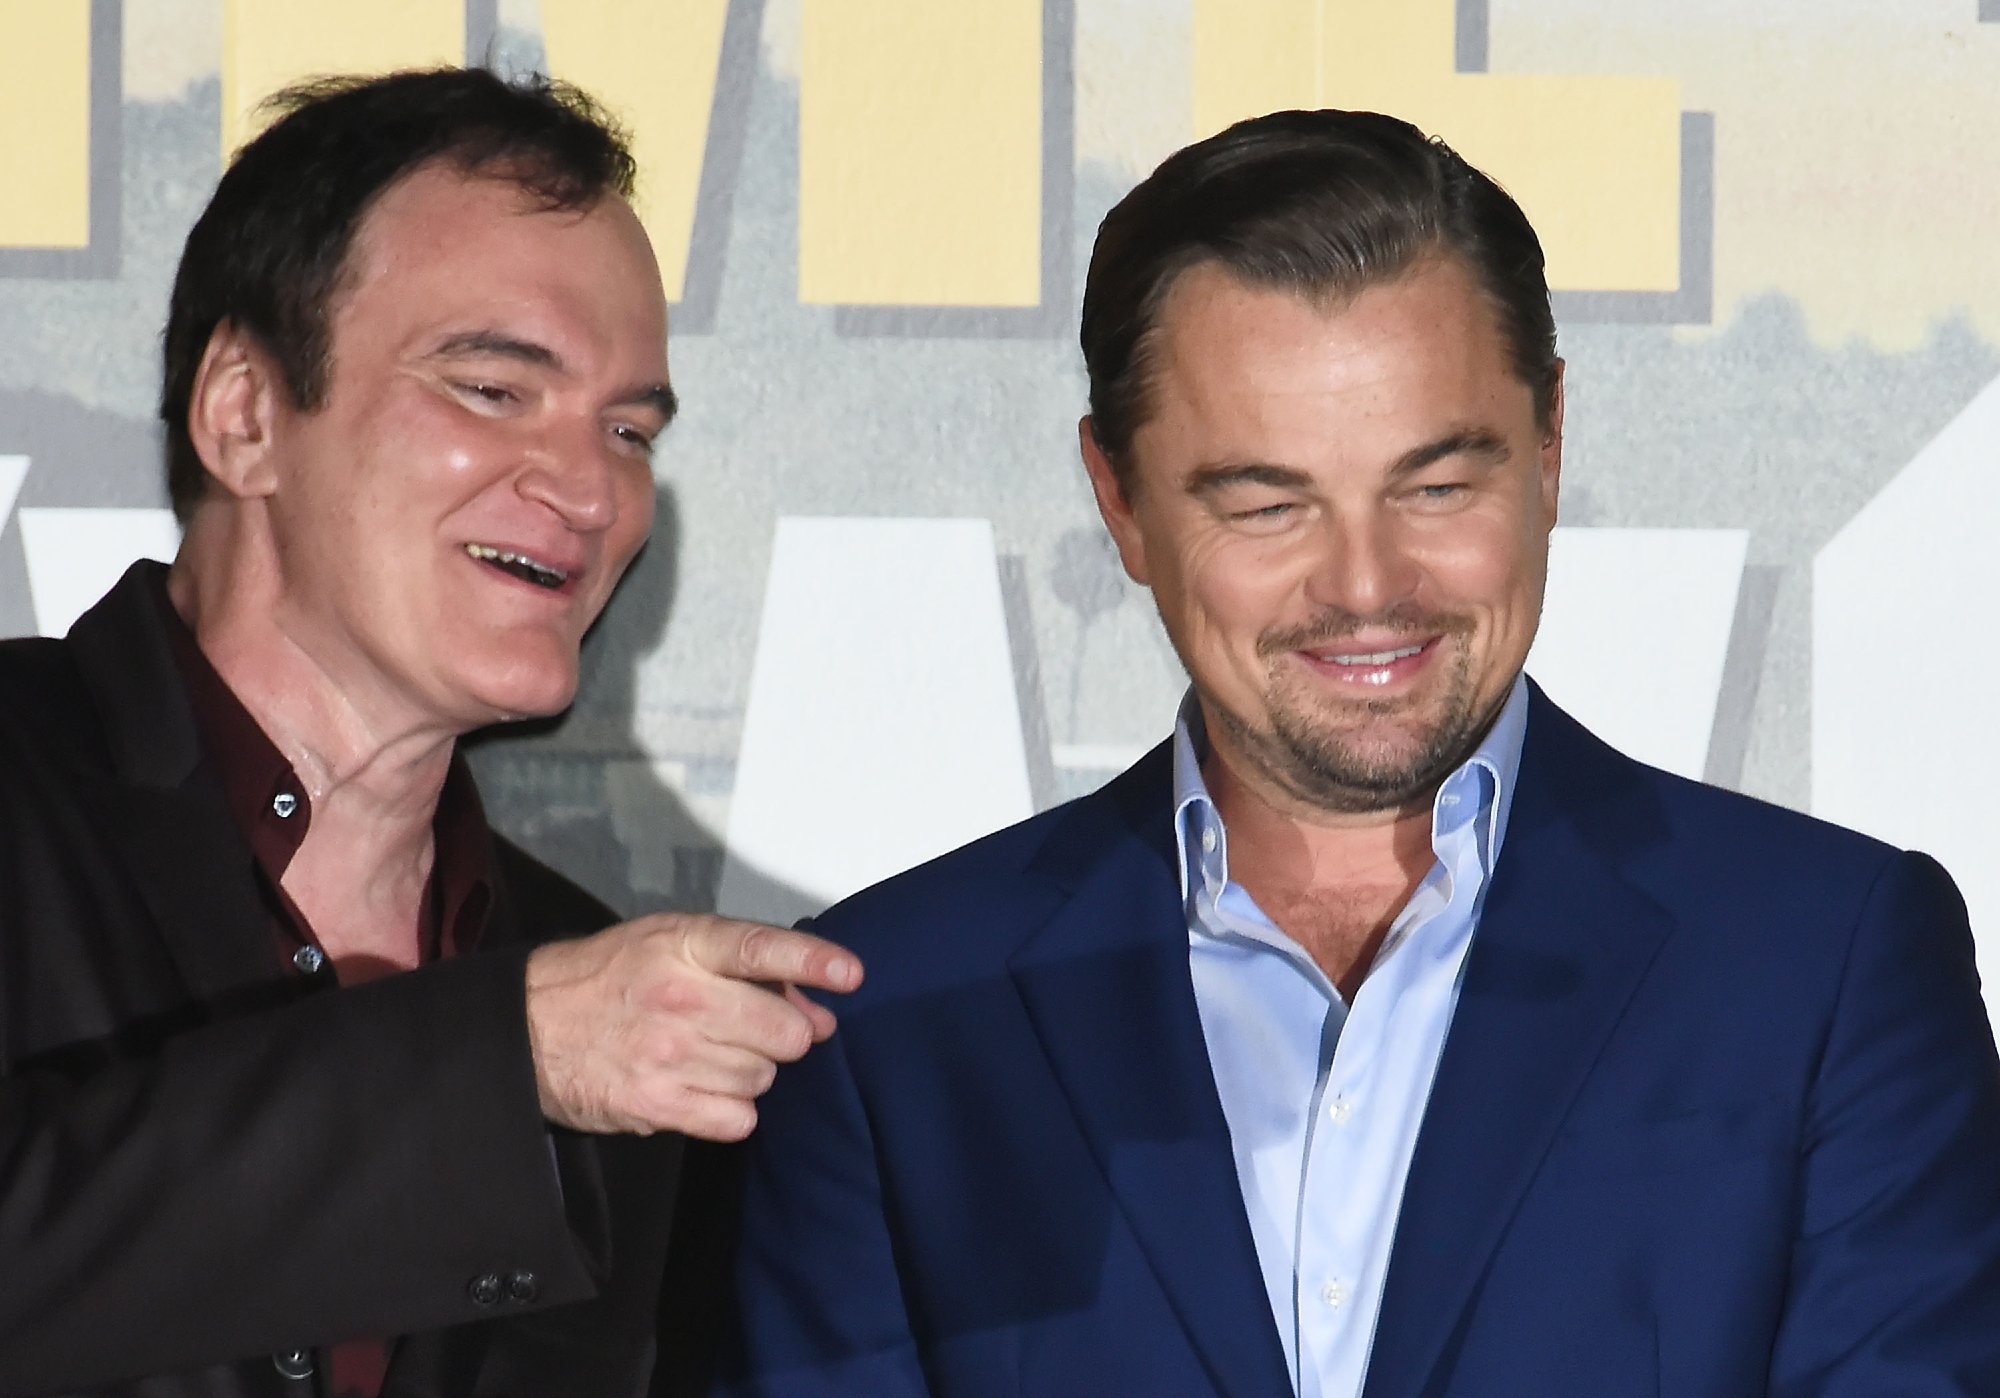 'Django Unchained' filmmaker Quentin Tarantino and star Leonardo DiCaprio pointing and smiling at the Japan premiere